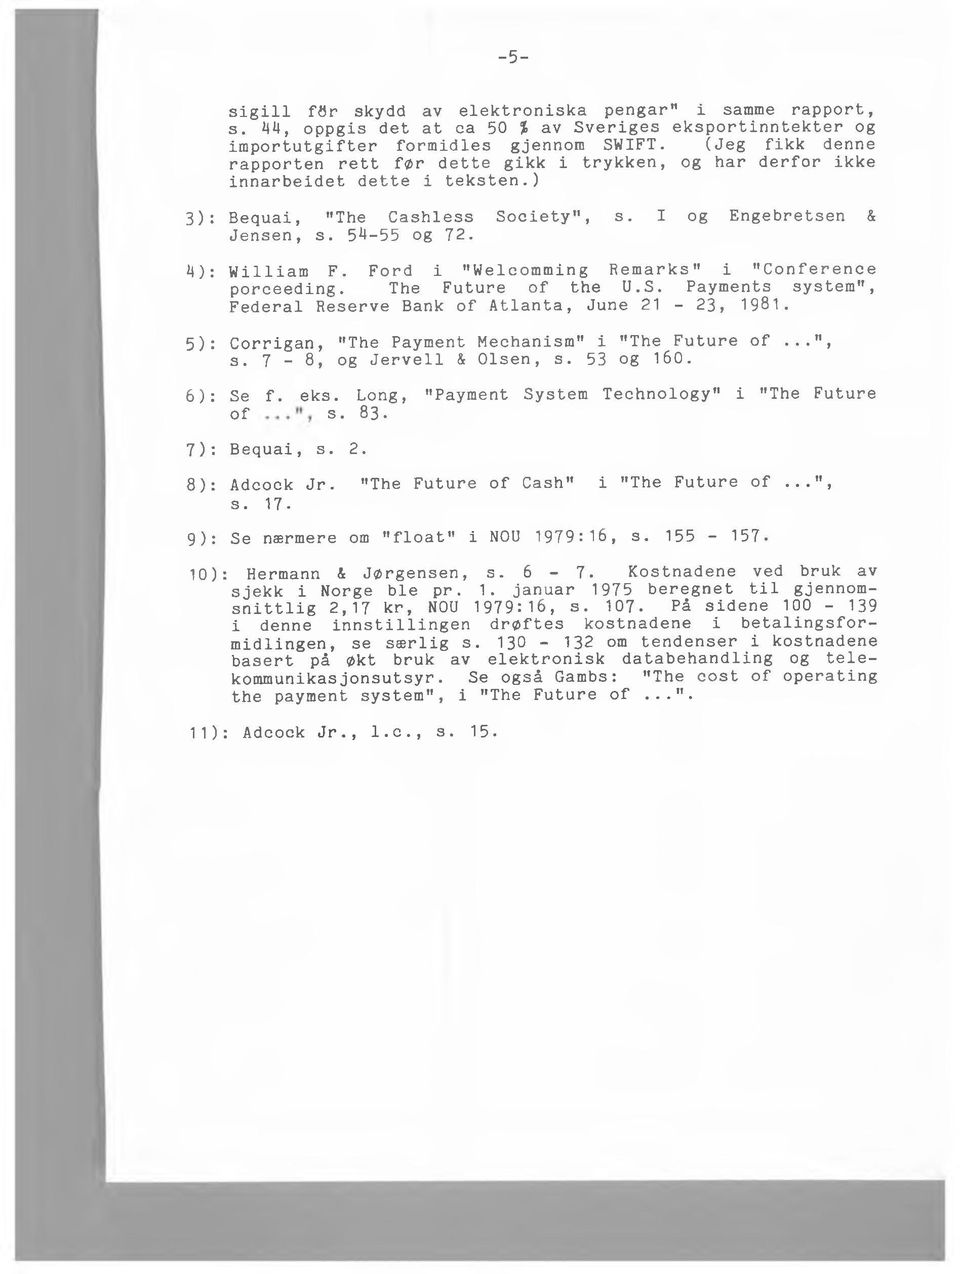 4): William F. Ford i "Welcomming Remarks" i "Conference porceeding. The Future of the U.S. Payments system", Federal Reserve Bank of Atlanta, June 21-23, 1981.